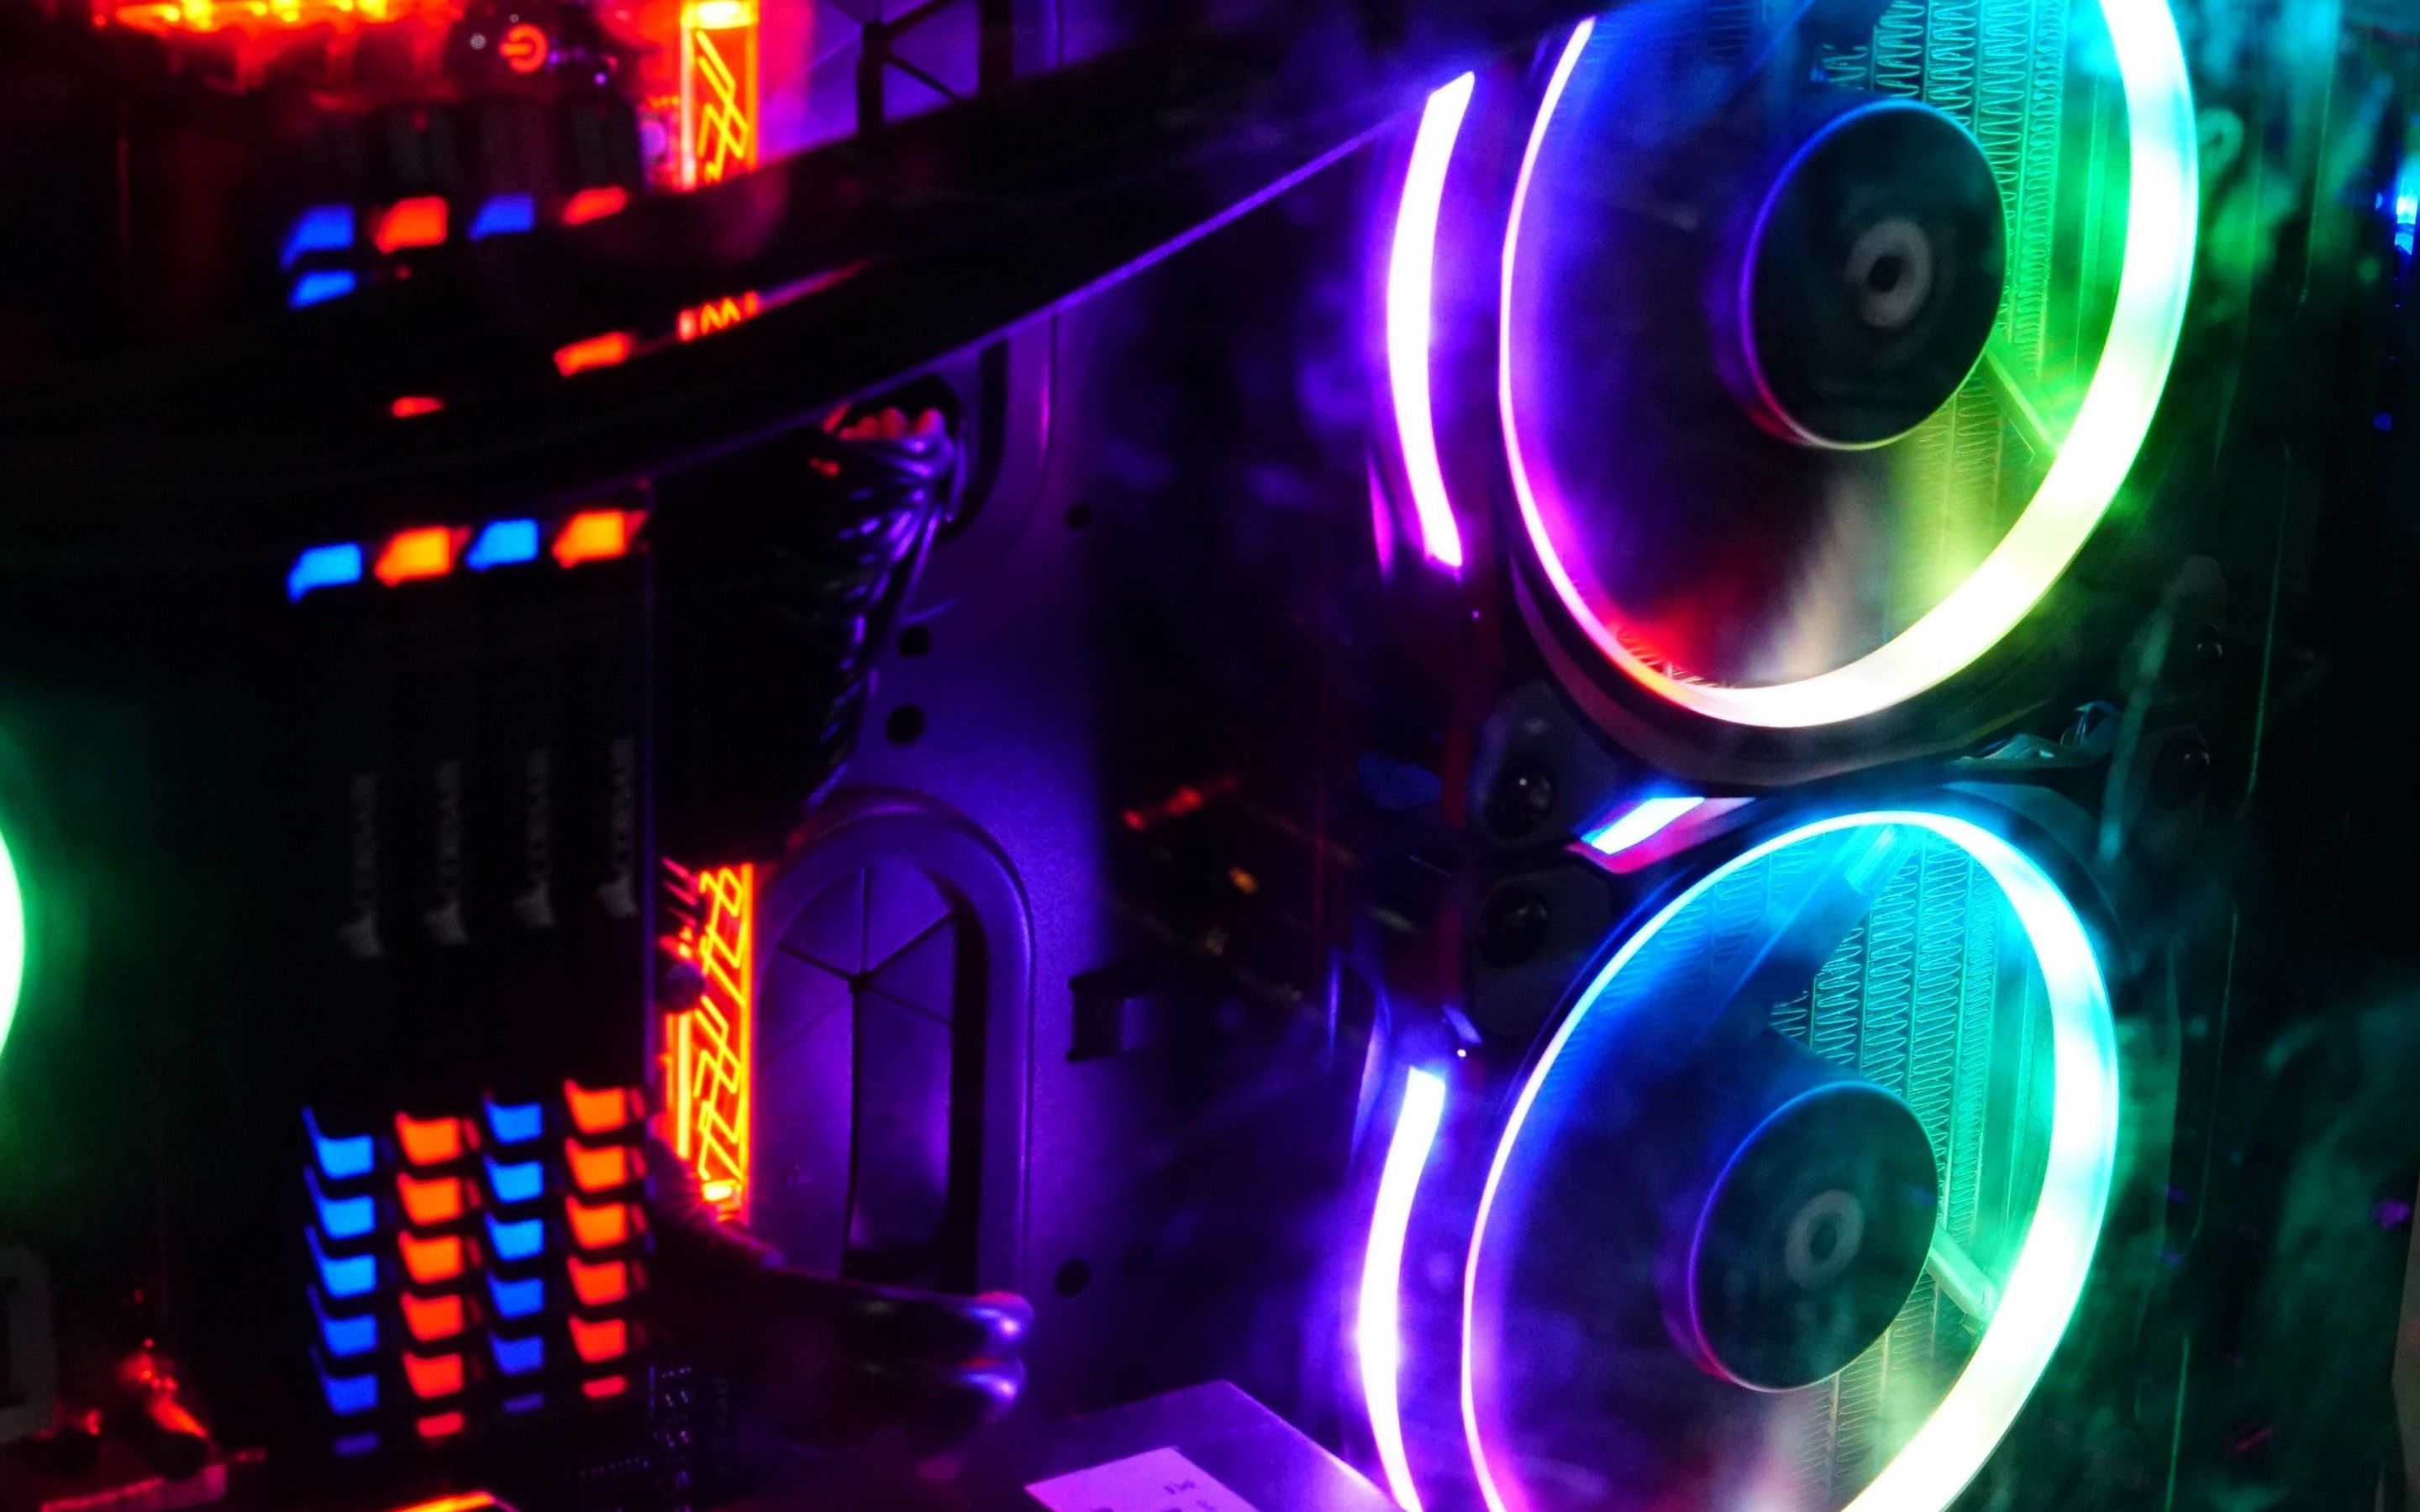 Download 2880x1800 Gaming Rig, Rgb Colors, Neon, Coolers, Rams Wallpapers for MacBook Pro 15 inch